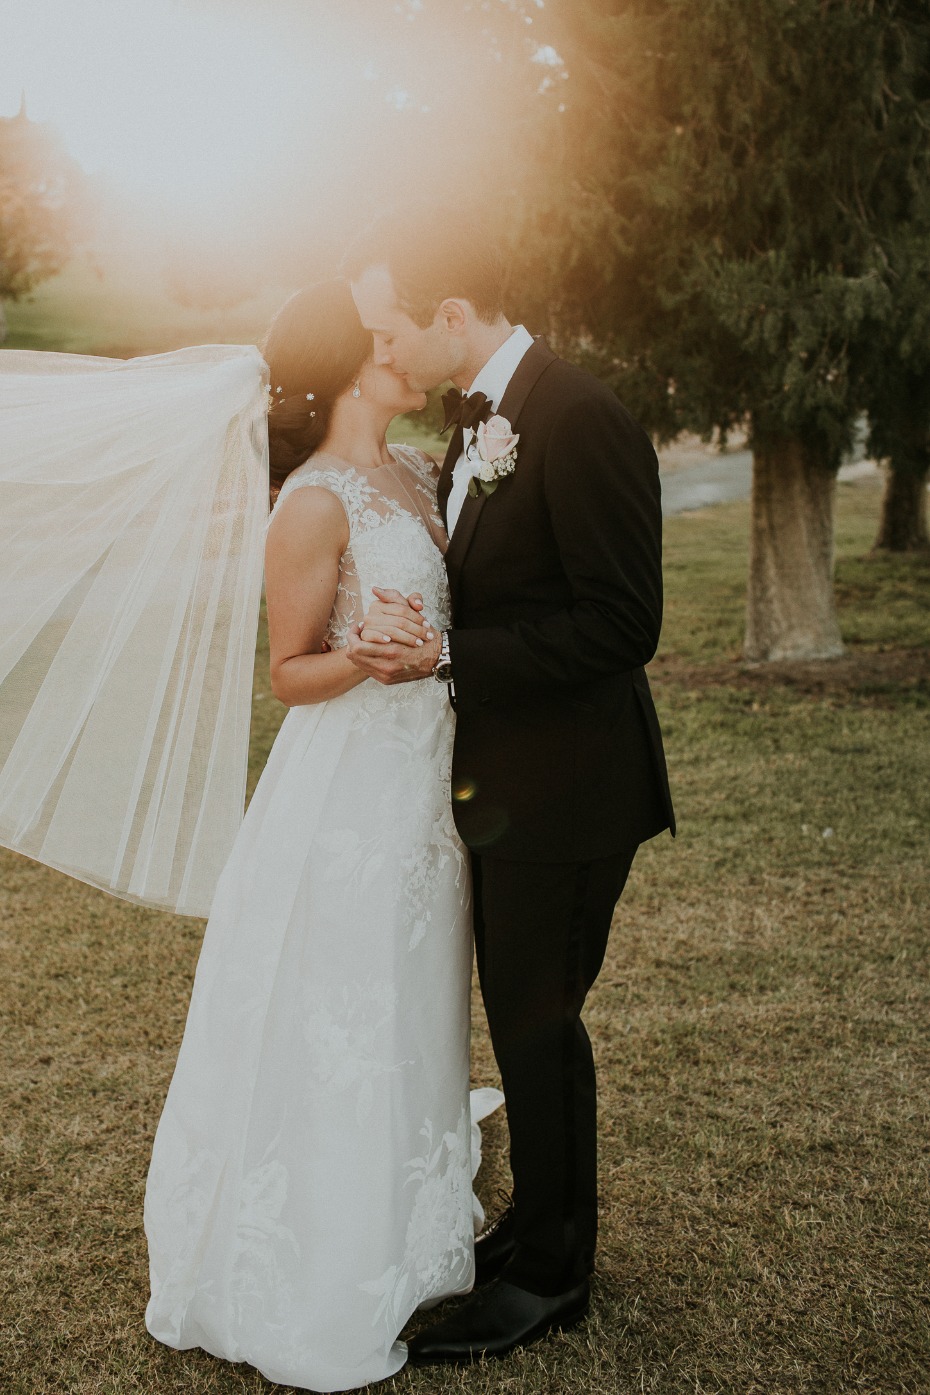 How To Have A Rose Gold Sunset Wedding In Cyprus